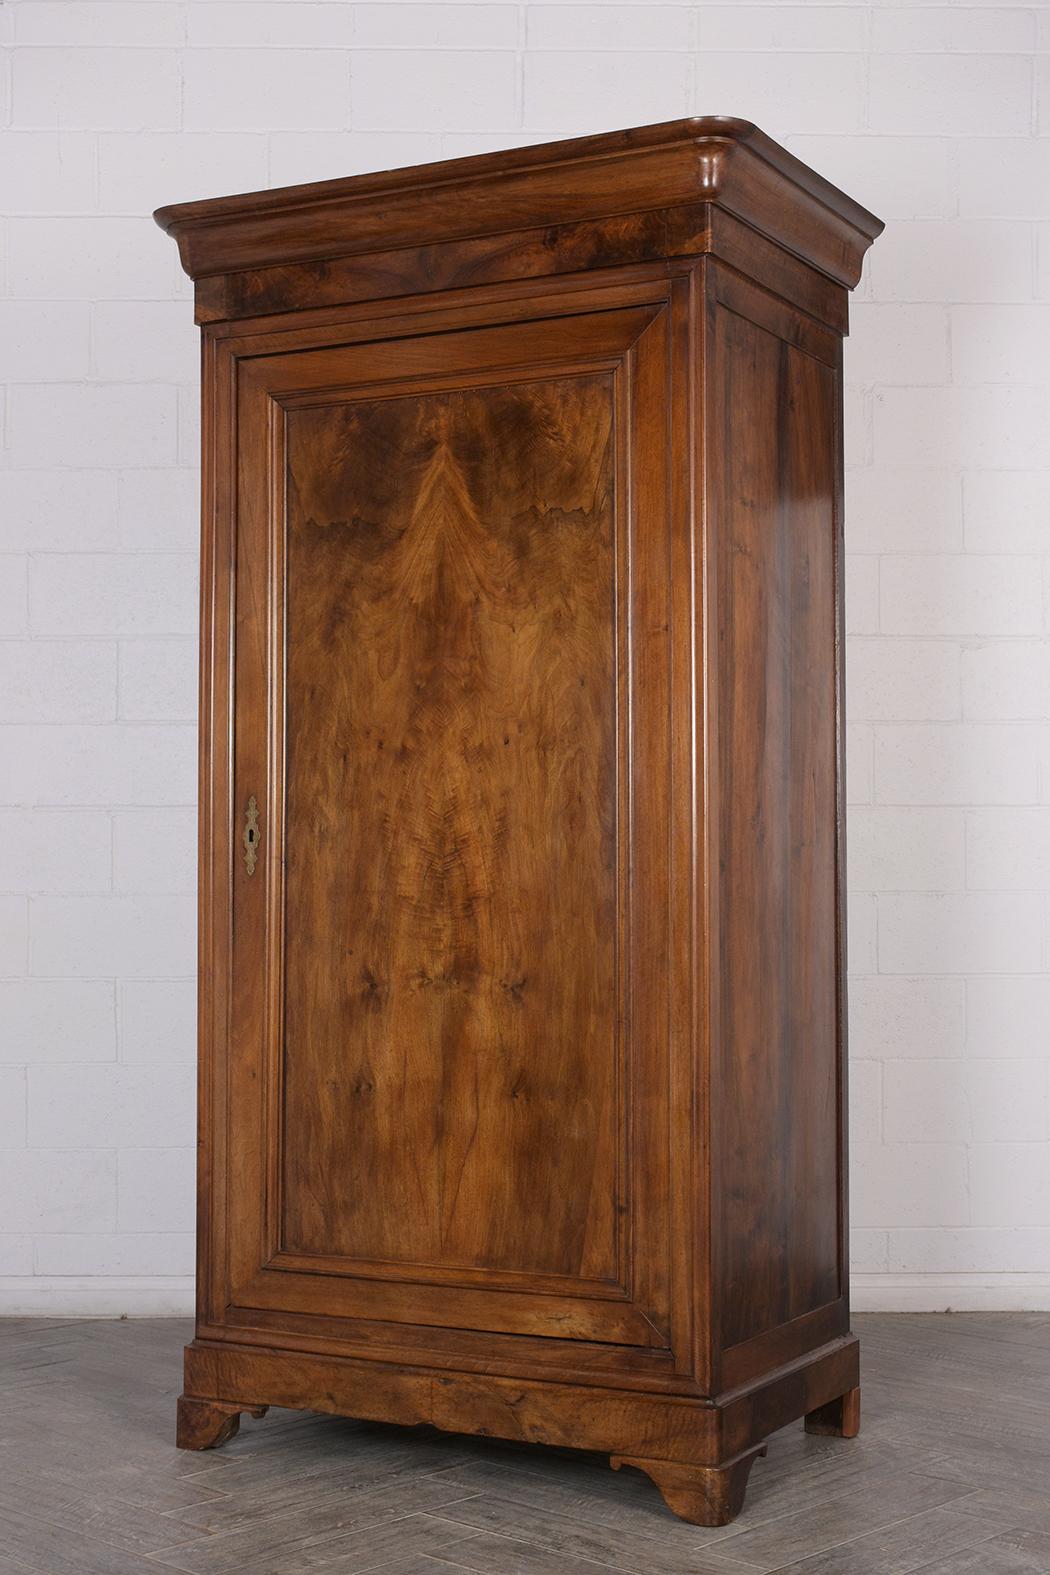 This Early 19th Century French Louis Philippe style Armoire has been completely restored and features the original color and French patina finish. The piece is made from solid walnut and features large molding on the top, single large door with a